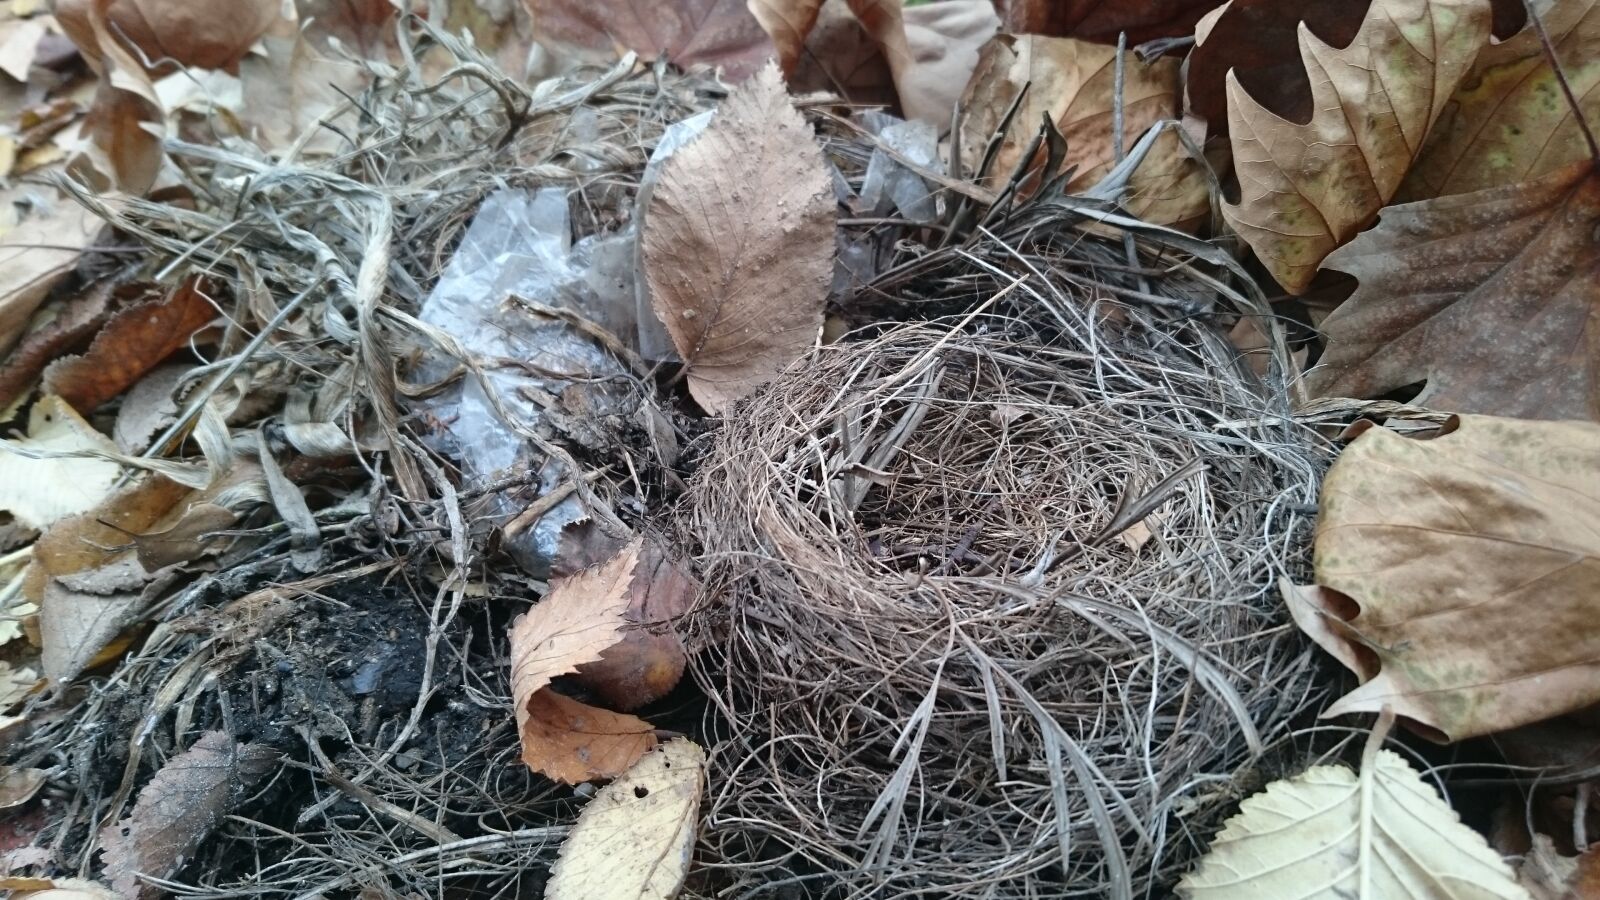 Sony Xperia Z3 Compact sample photo. Nest, leaves, gutter photography